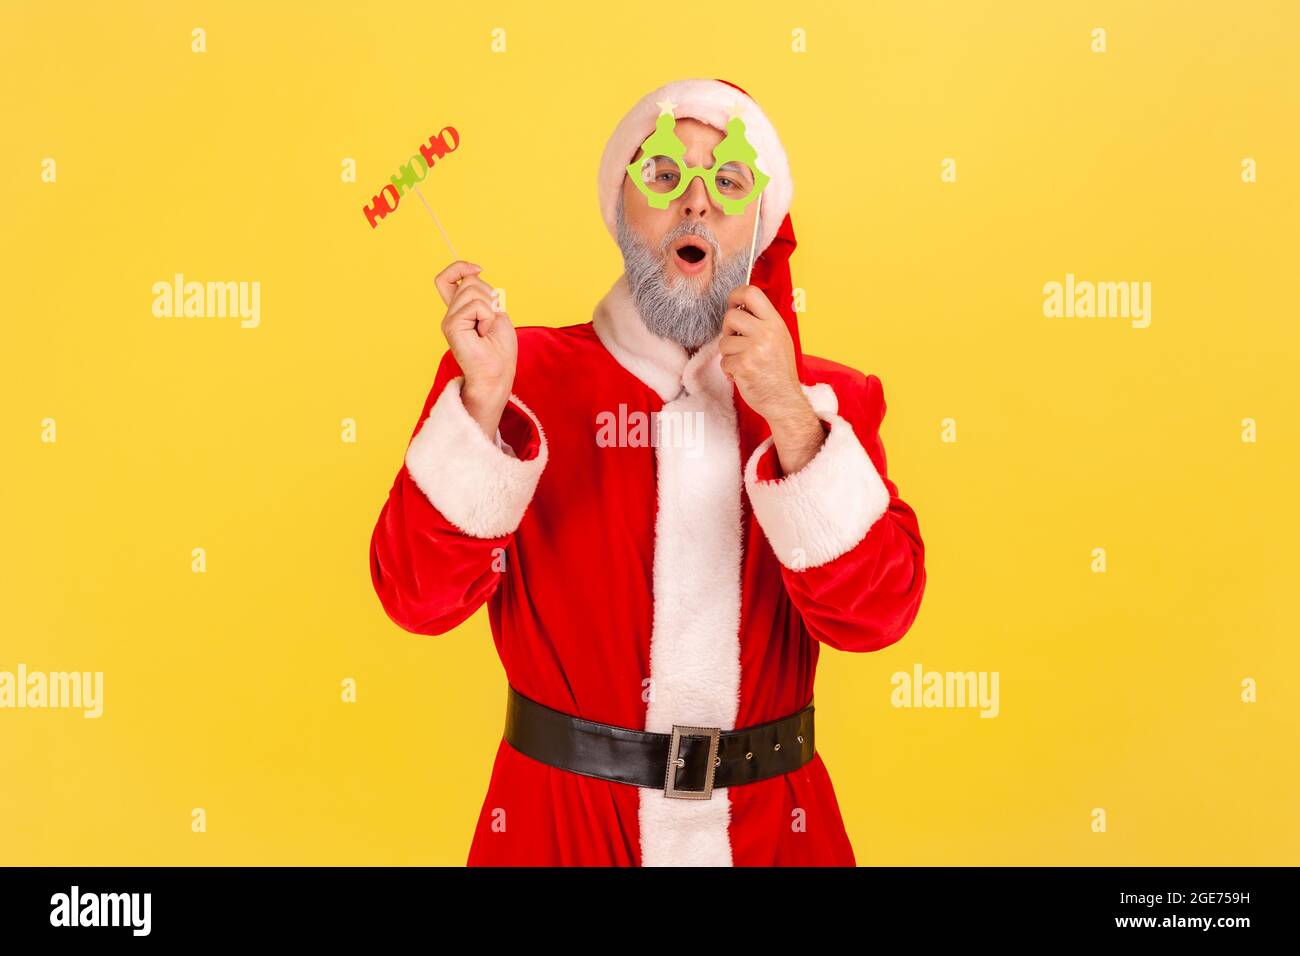 Excited elderly man with gray beard wearing santa claus costume holding paper cards on sticks, celebrating christmas and congratulating with new year. Stock Photo